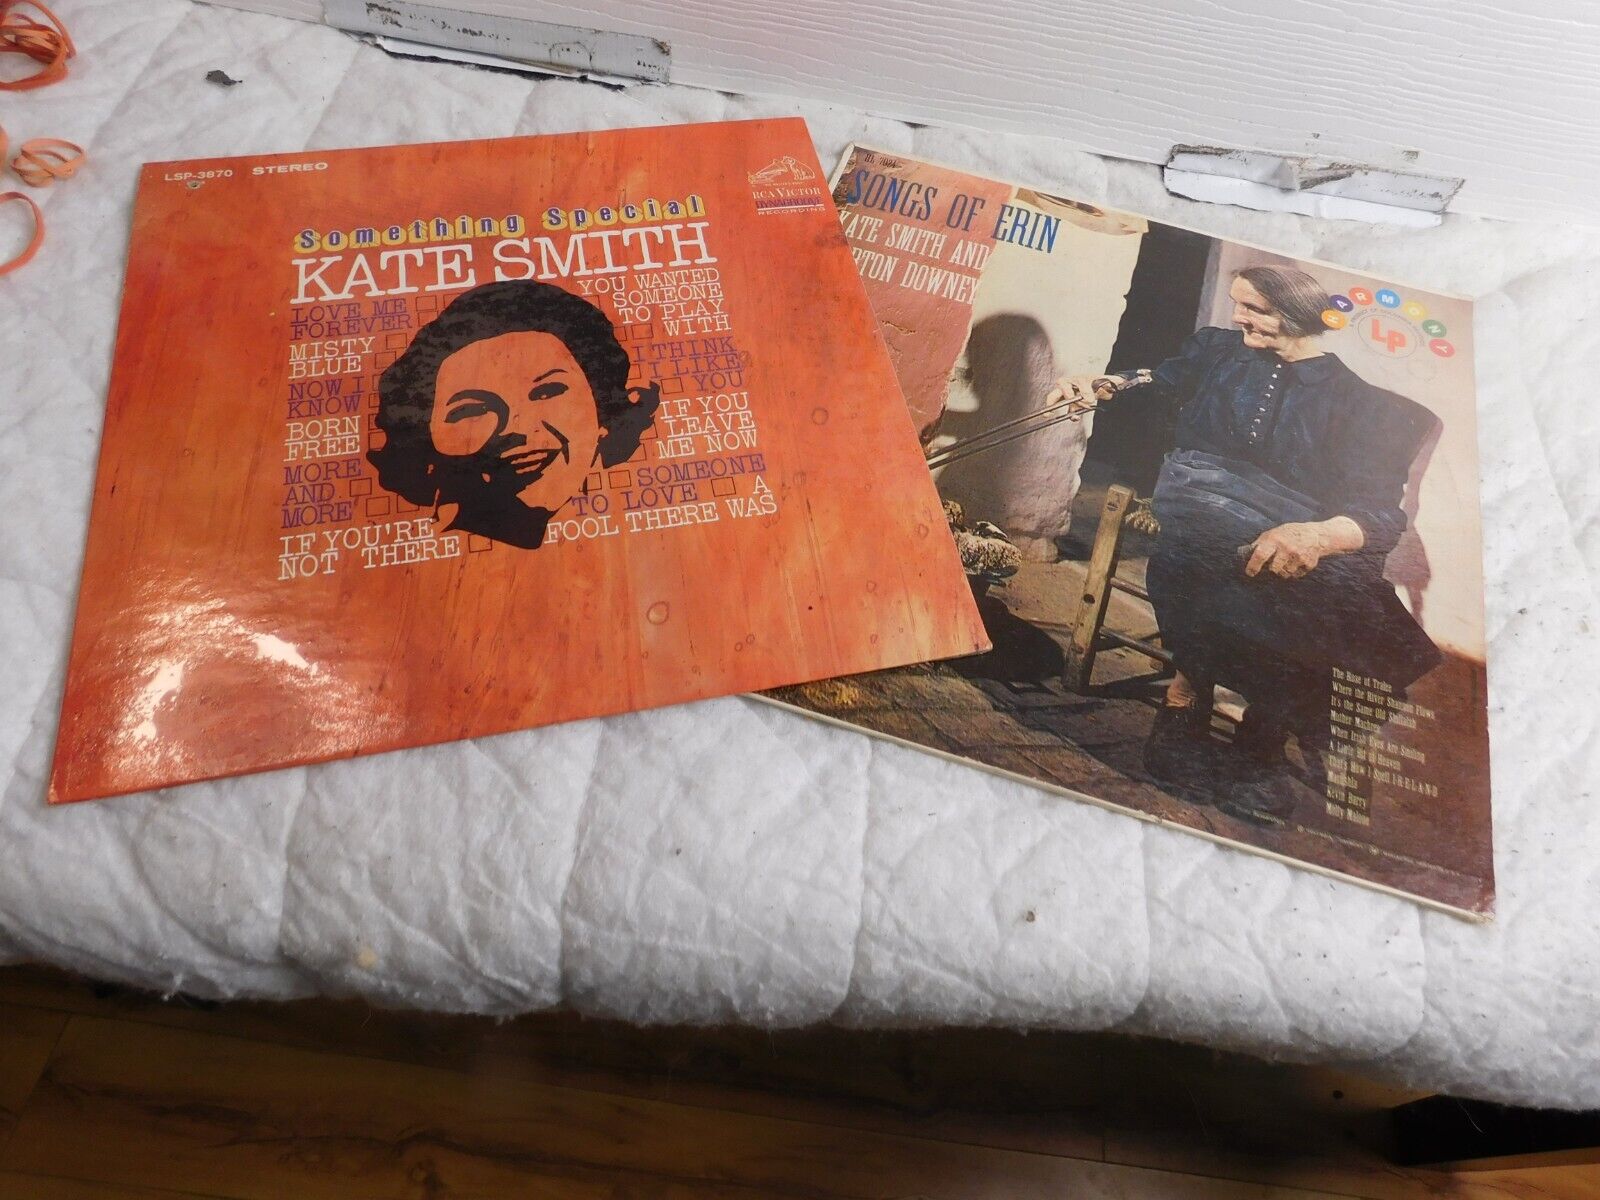 LOT OF 2 KATE SMITH VINYL RECORD LPS - SONGS OF ERIN;SOMETHING SPECIAL/SEALED